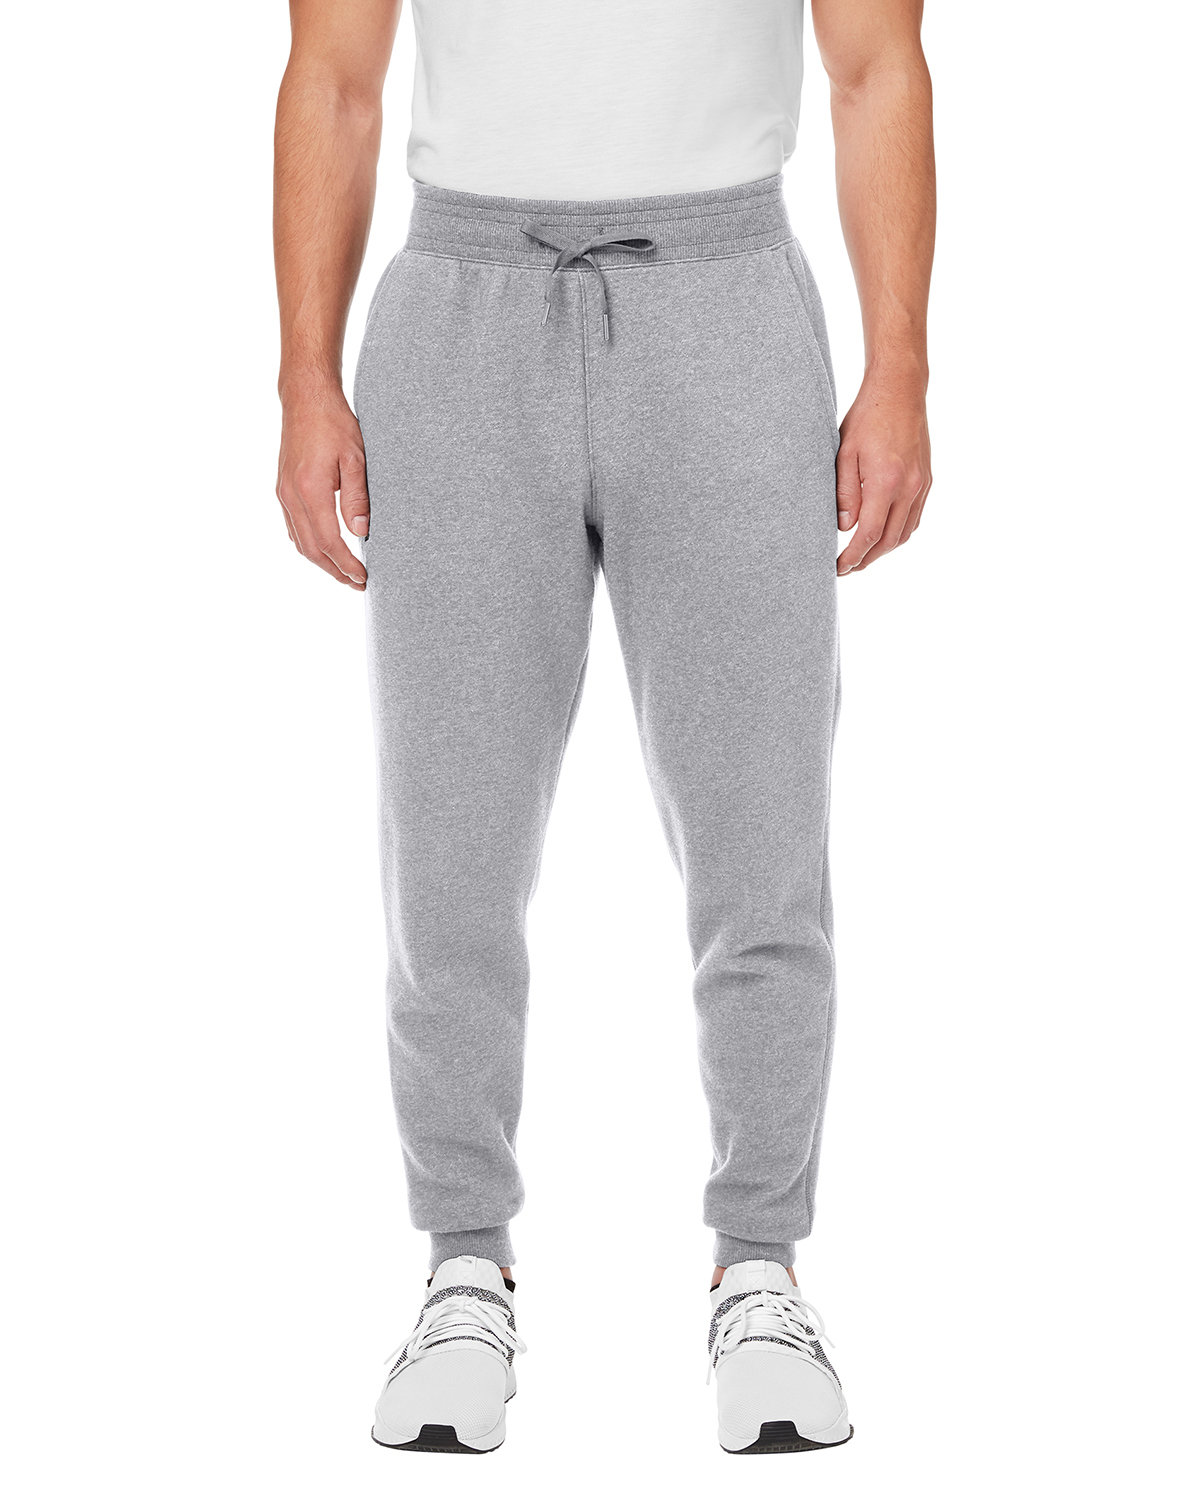  Flame Resistant FR Sweat/Jogger Pants - Heavy Weight